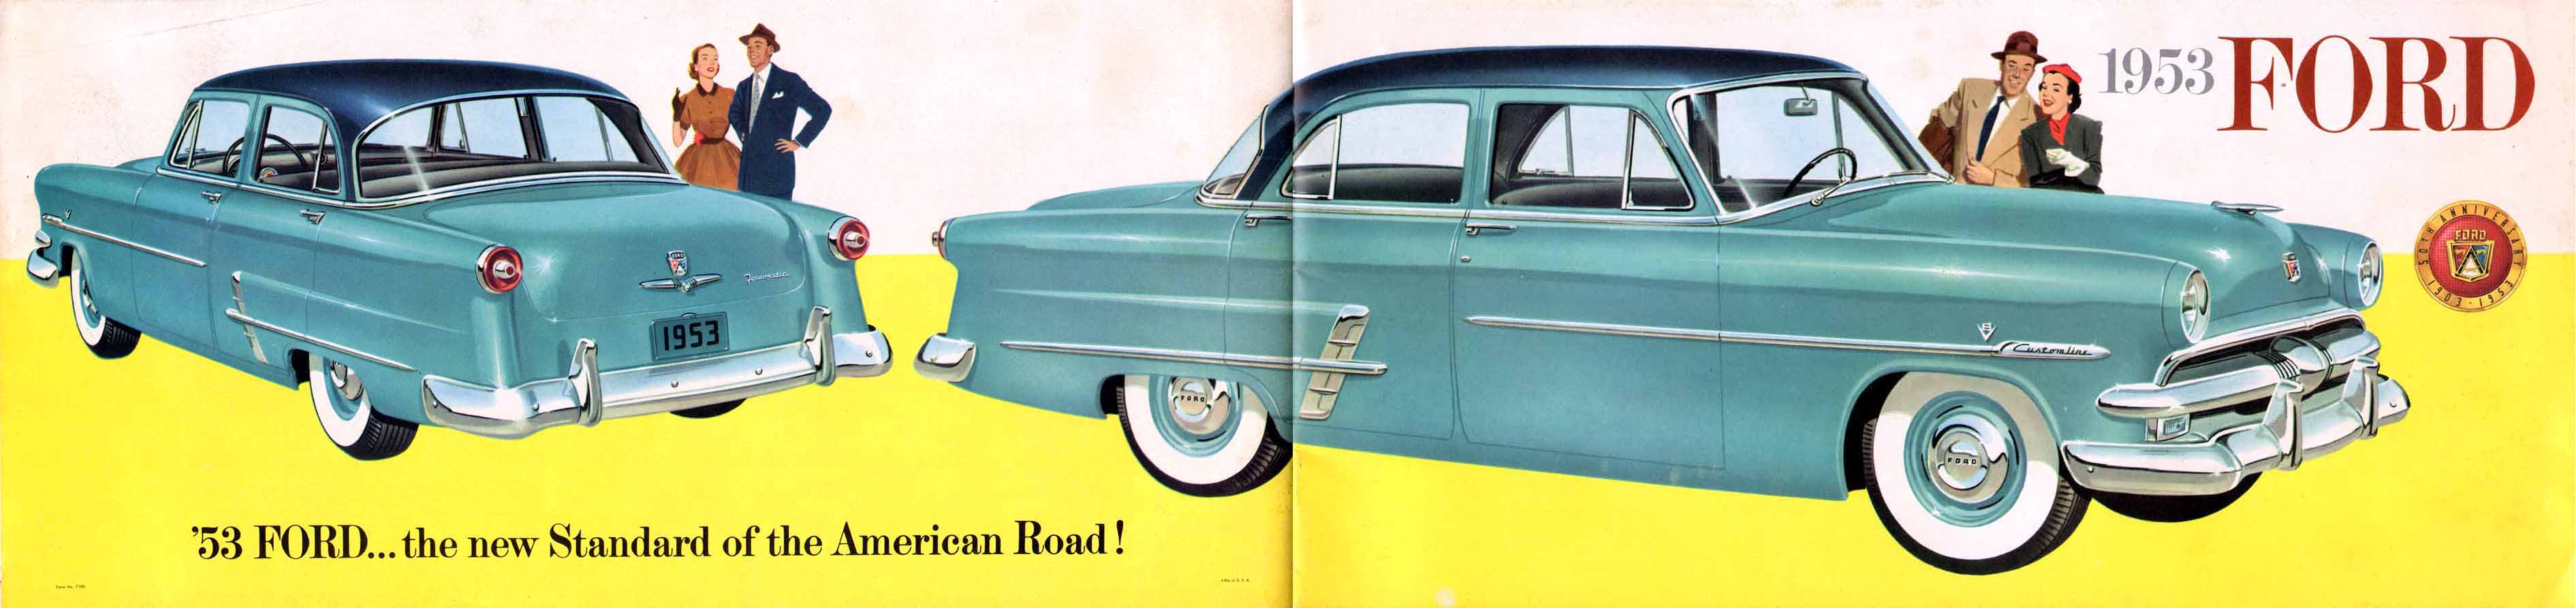 1953 Ford-01-32